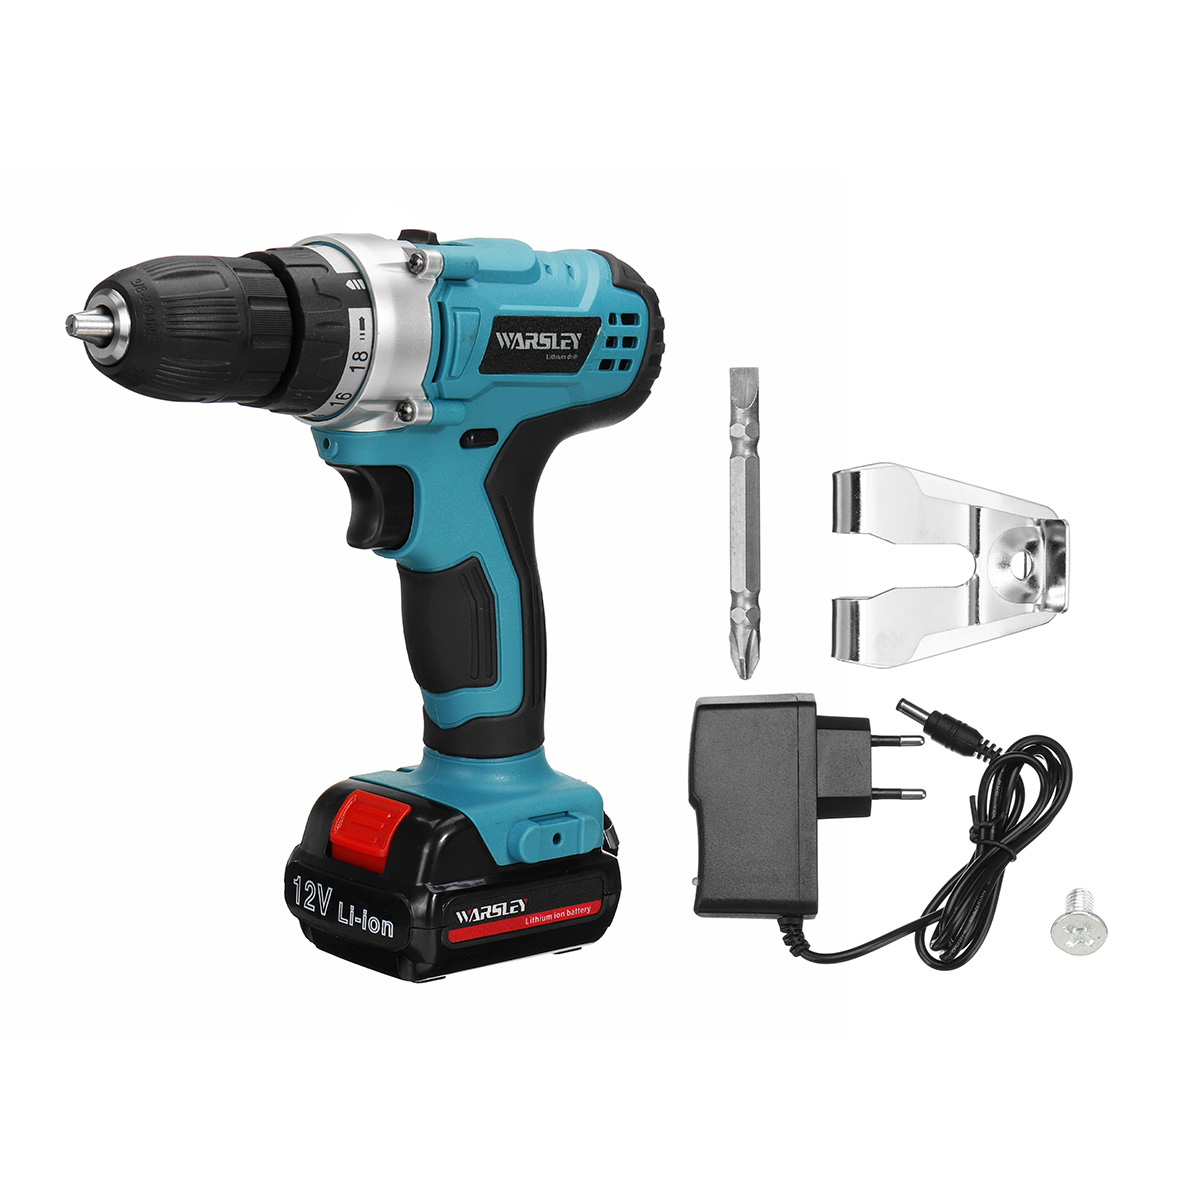 12V Cordless Drill 1500mAh Electric Driller 18+1 Mode Power Drills 1 Lithium Battery With Bits